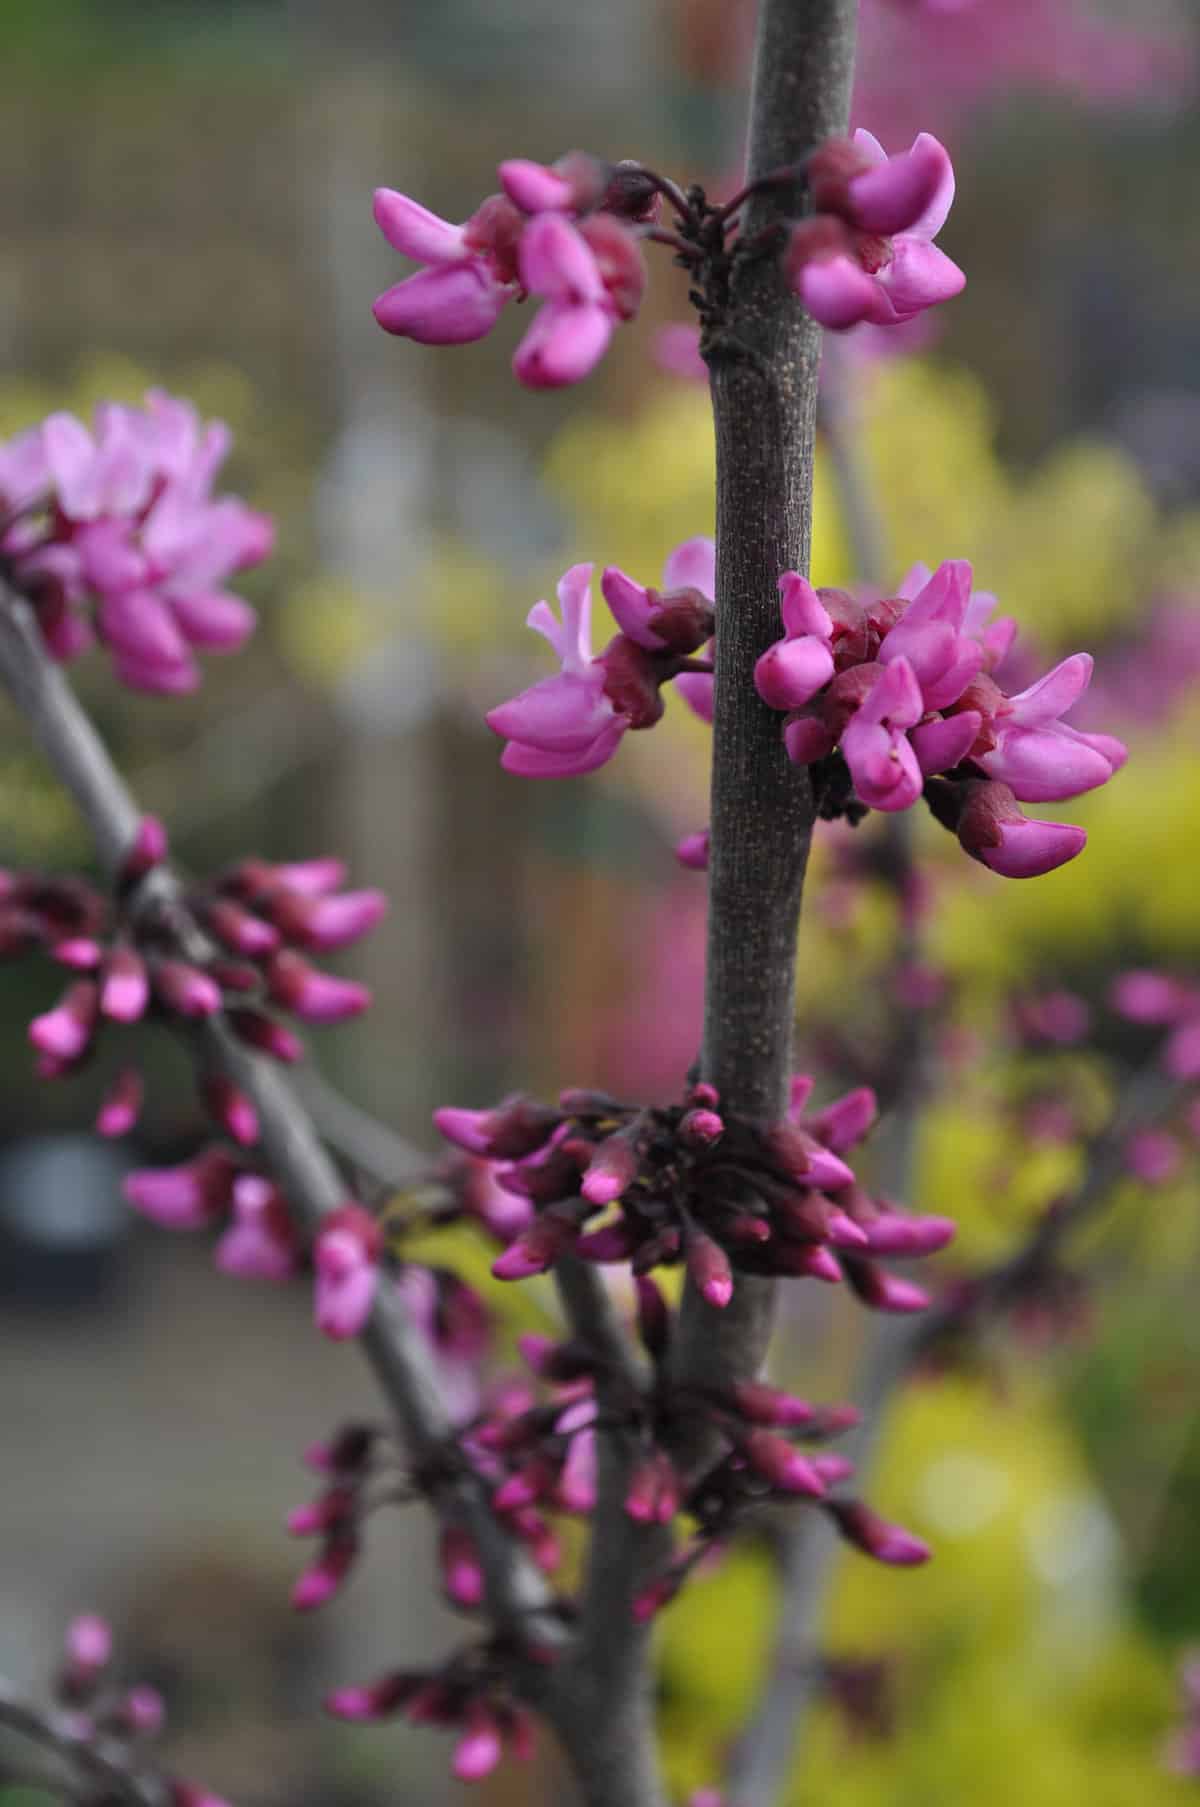 A close up of redbud tree flowers.